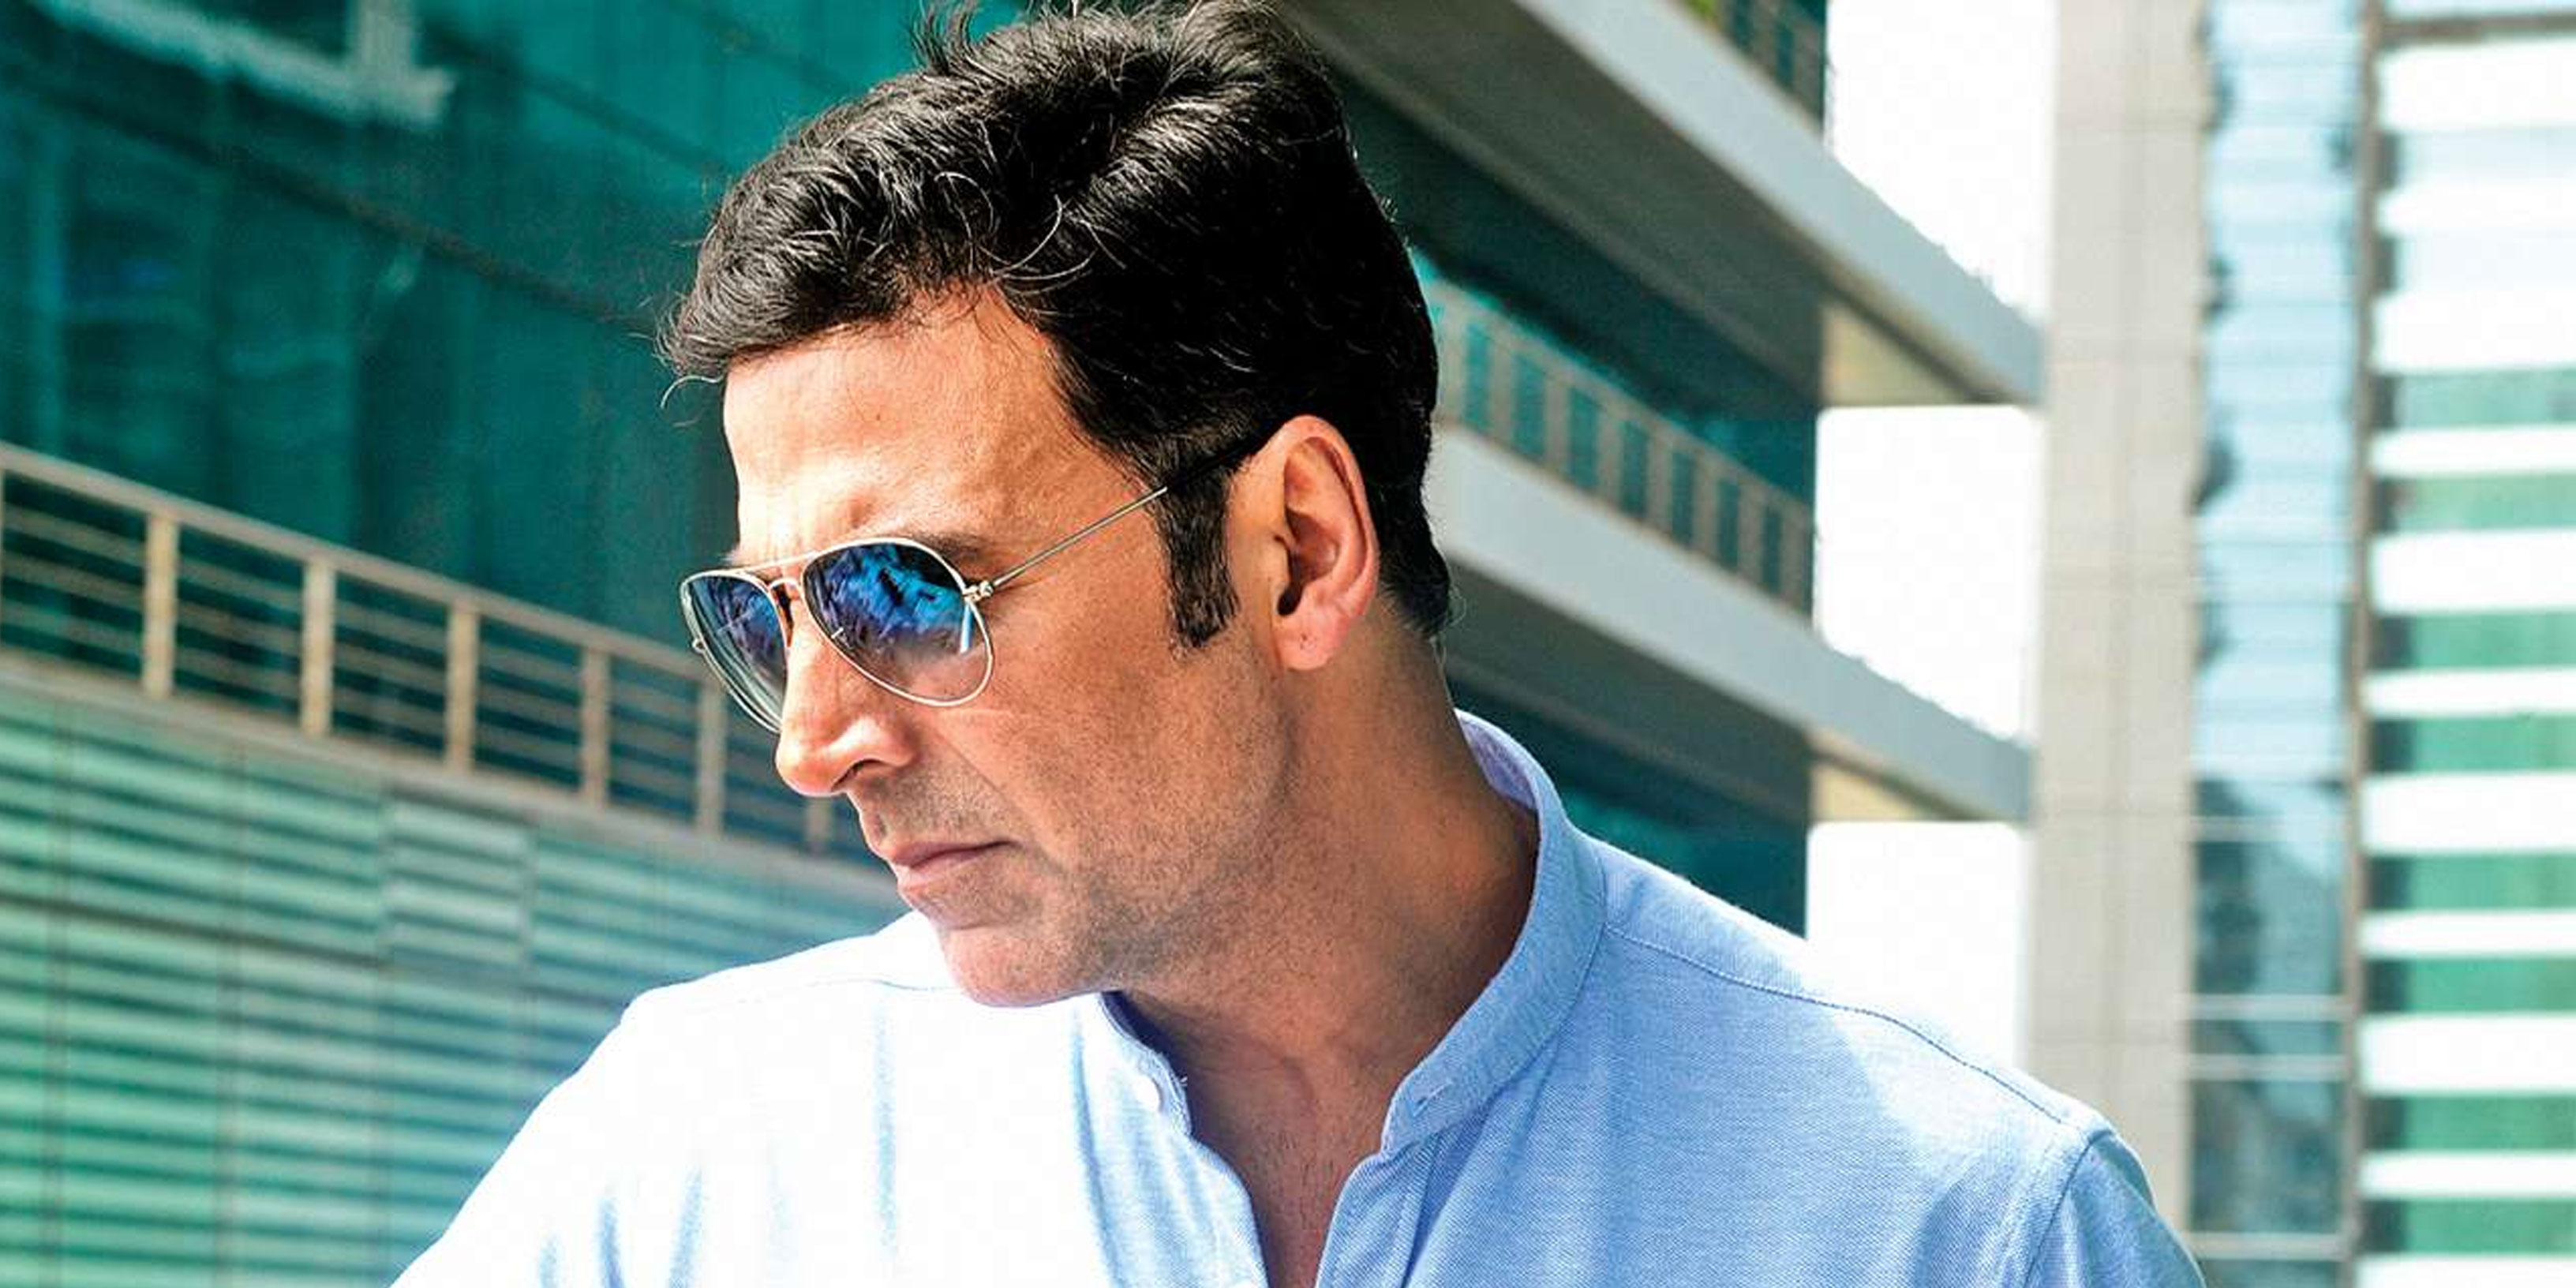 Akshay Kumar says he wants to distance himself from genre-specific tags